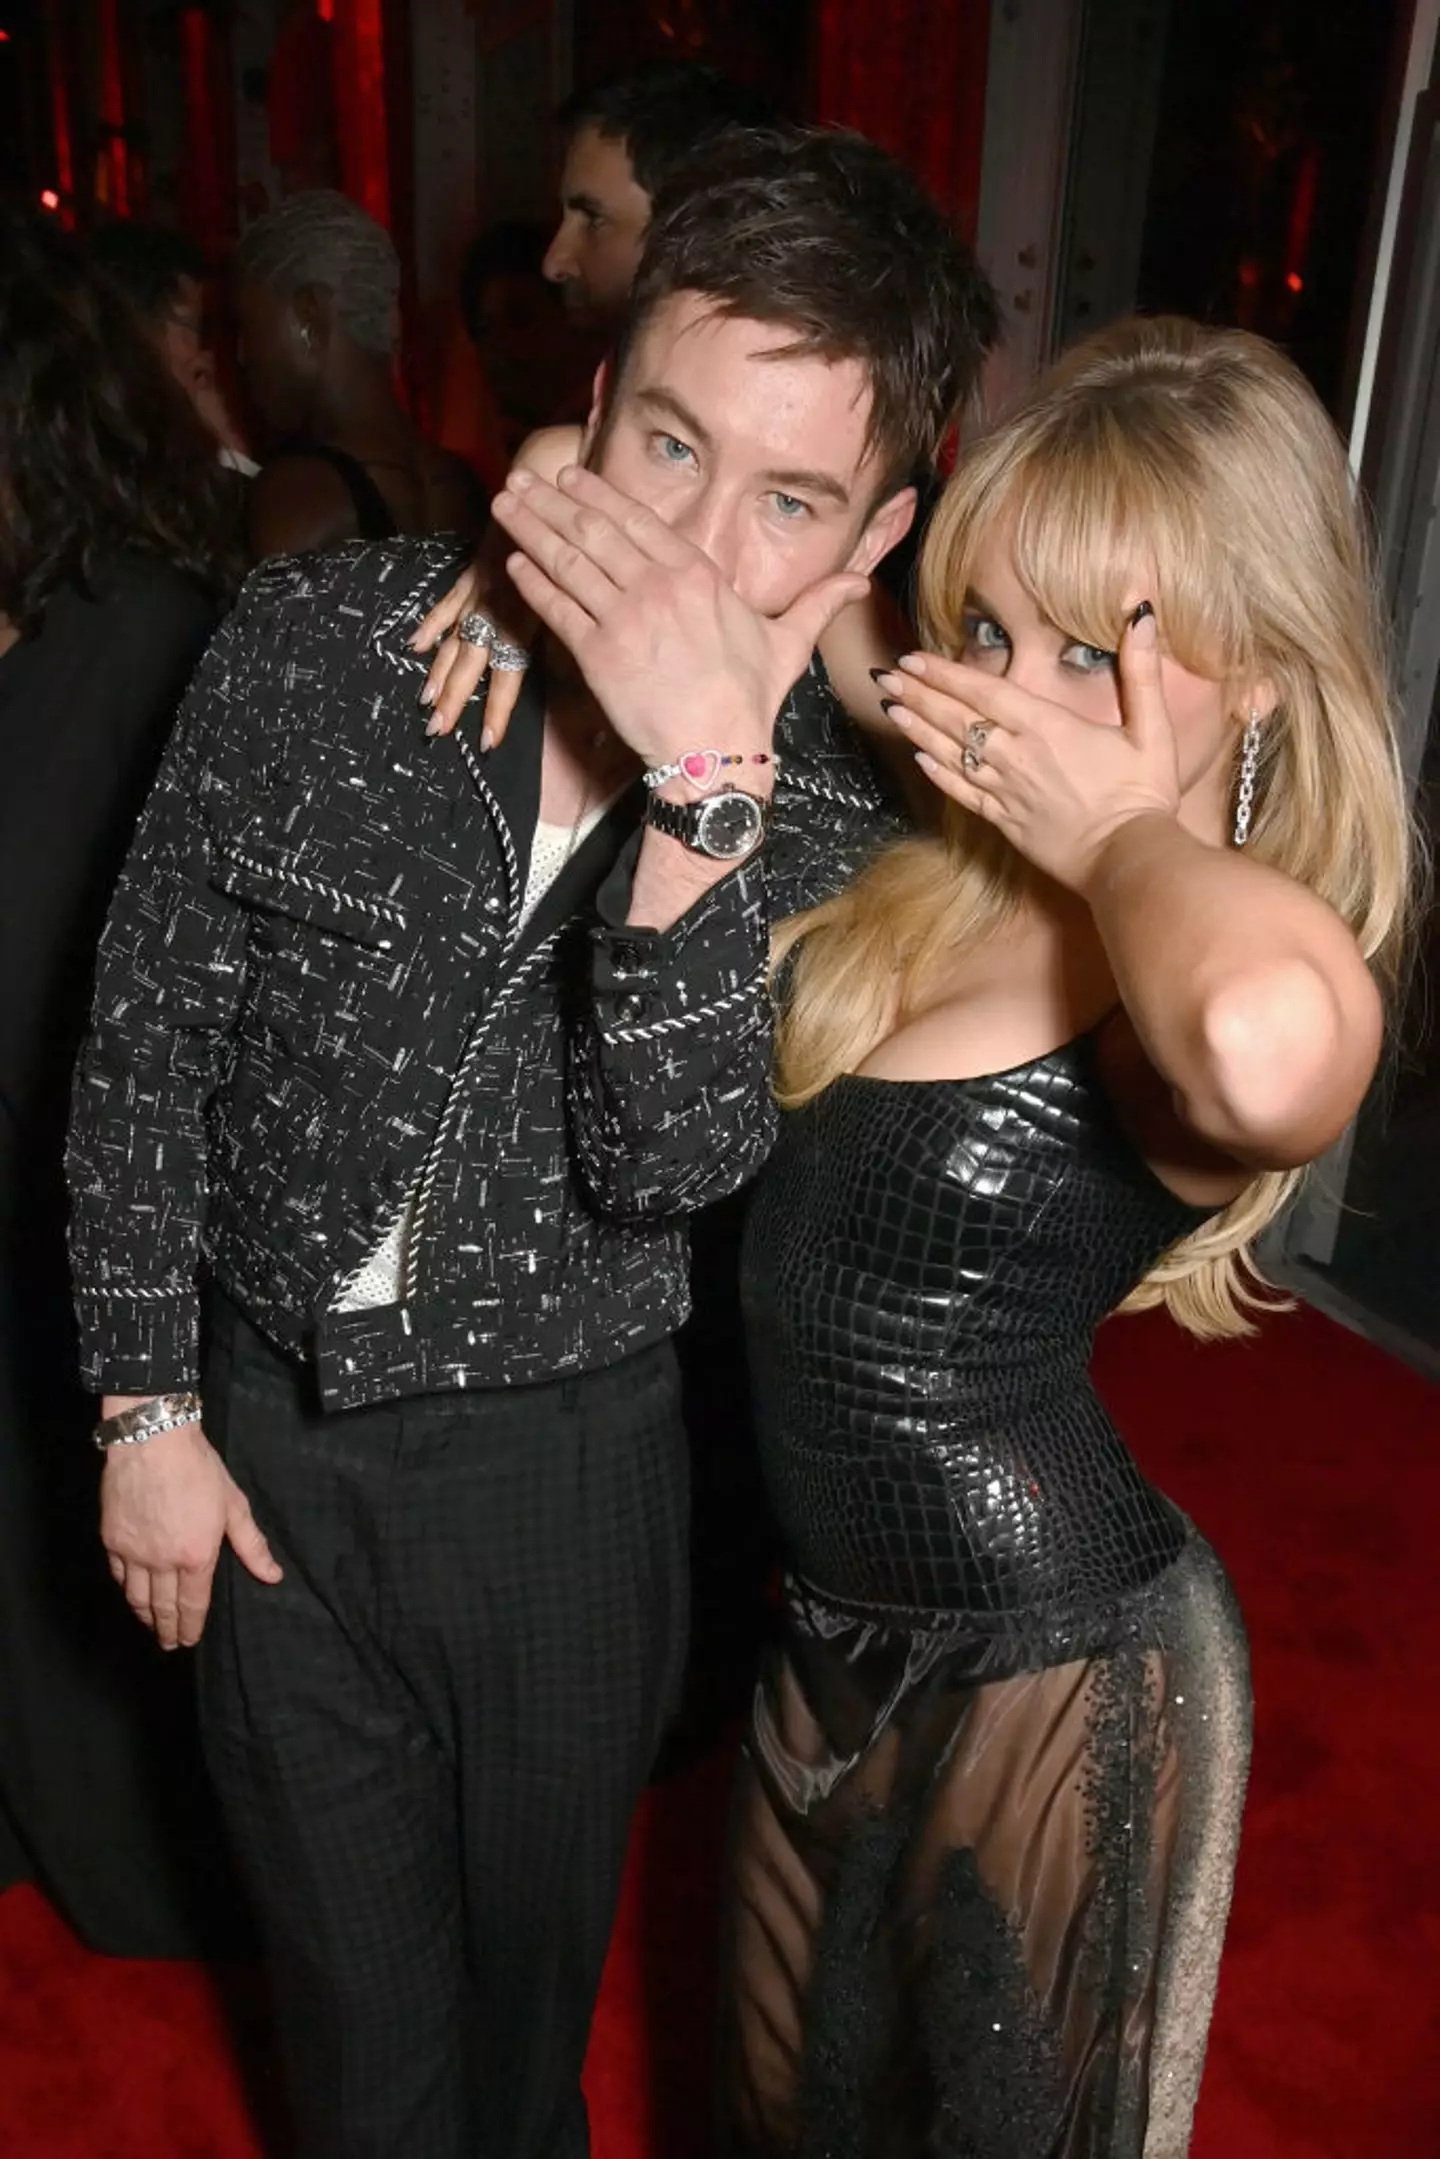 Barry Keoghan and Sabrina Carpenter posed together at the Vanity Fair Oscars afterparty.